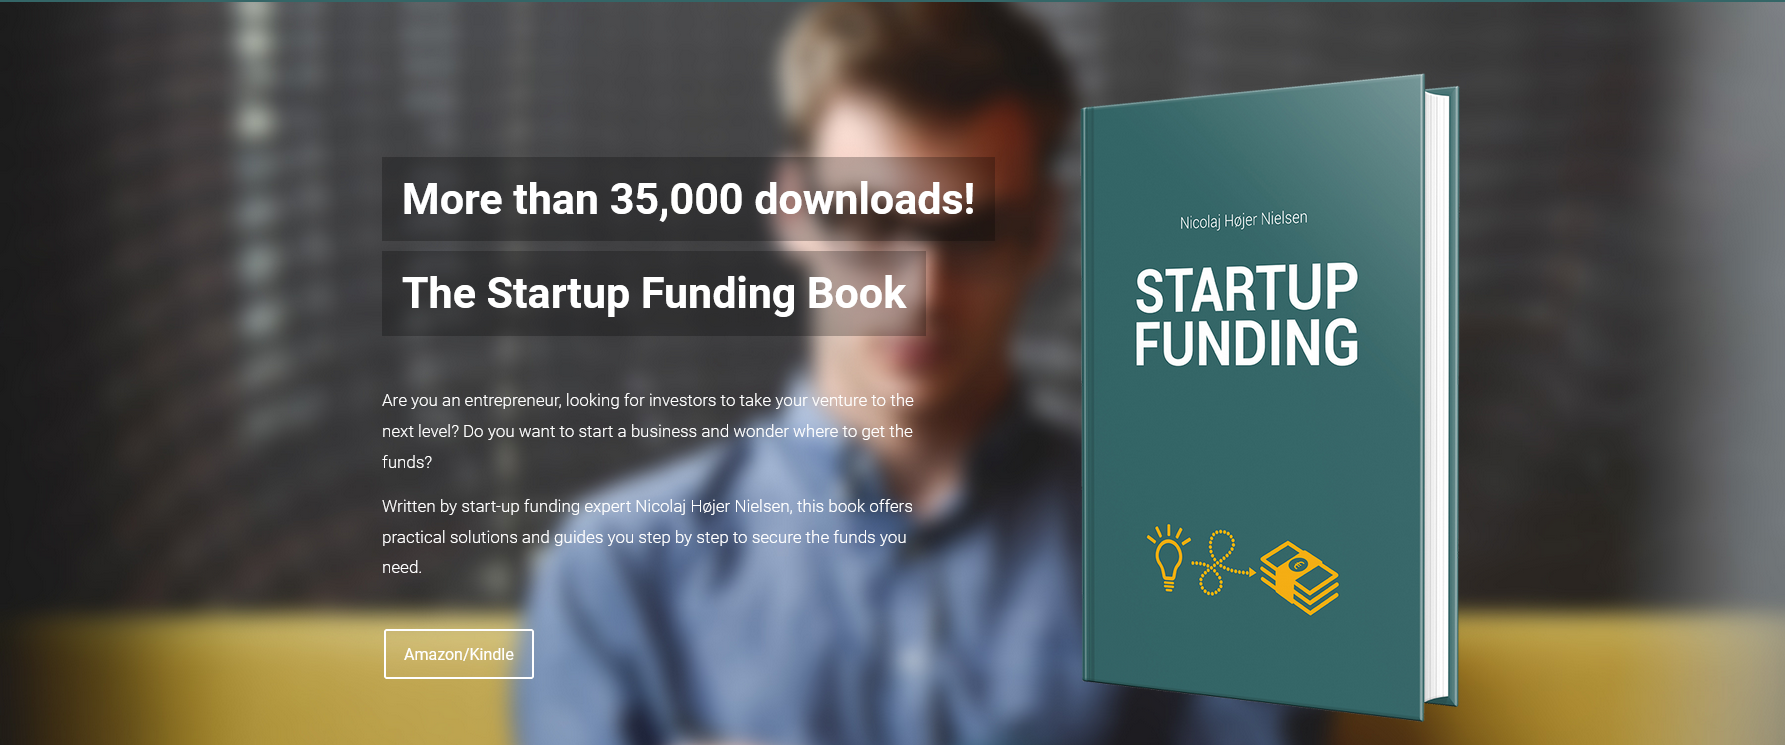 Find out what it takes to get funded as a startup.